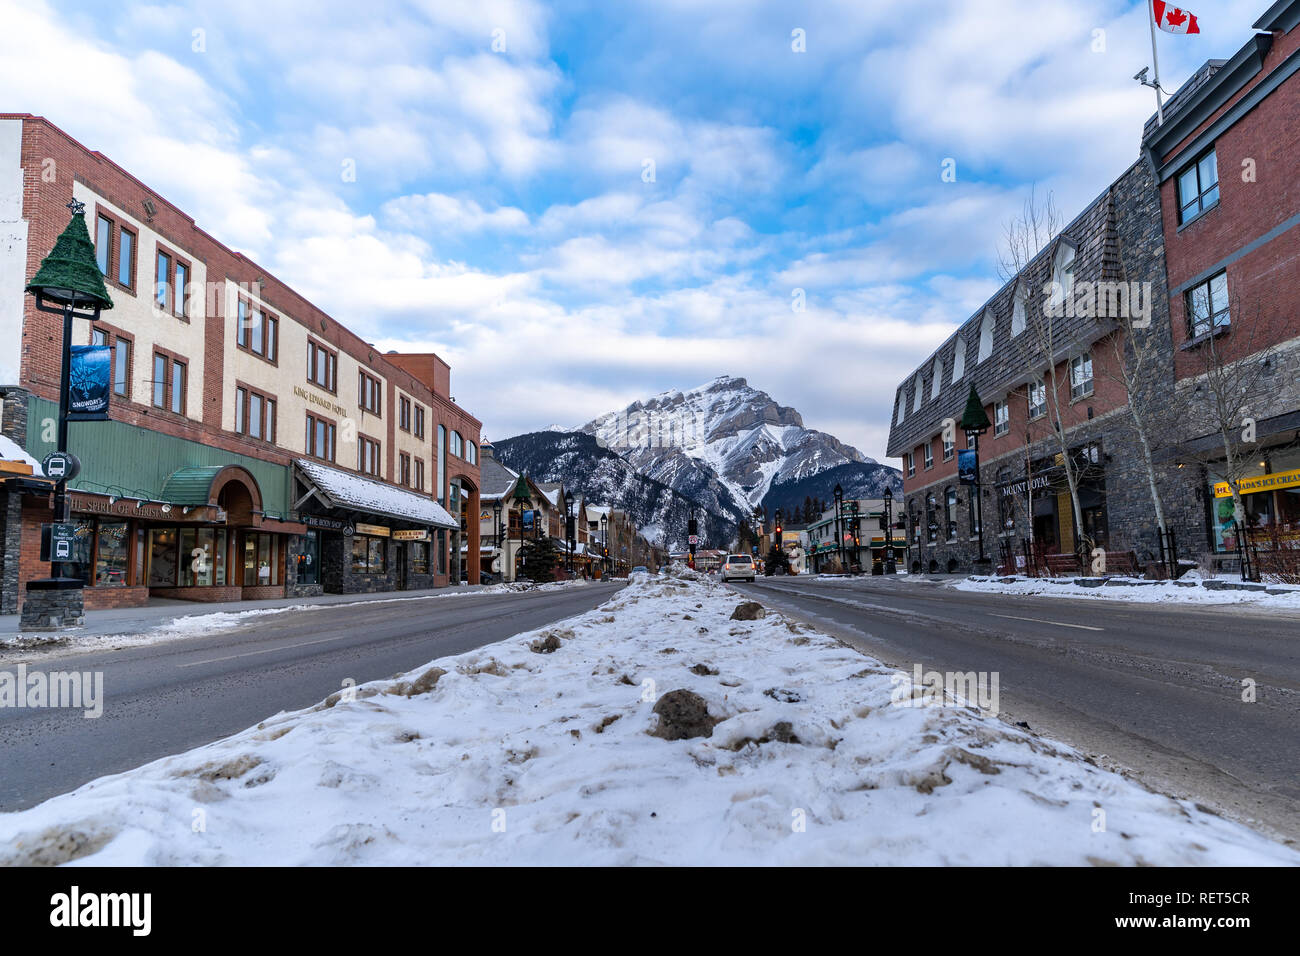 Banff, Alberta Canada - Jan 21, 2019: View of Banff Avenue, a popular tourist destination in the Canadian Rockies, filled with gift shops and restaura Stock Photo